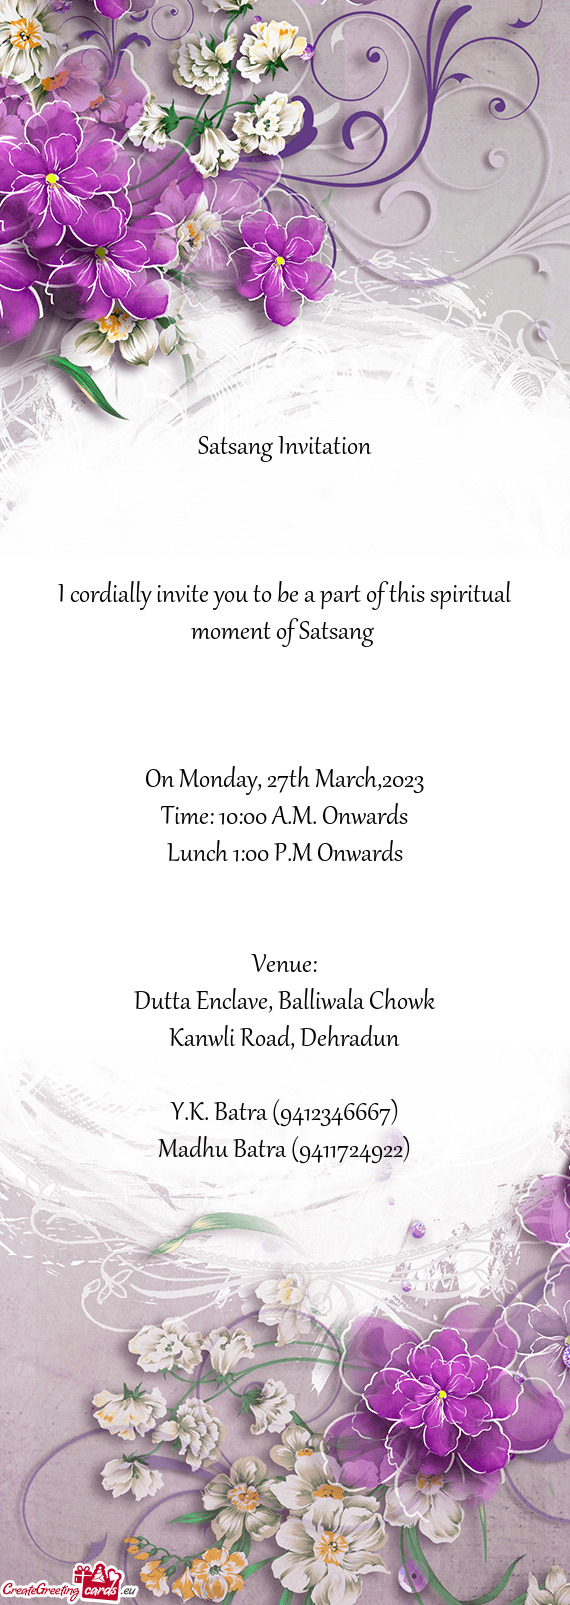 I cordially invite you to be a part of this spiritual moment of Satsang